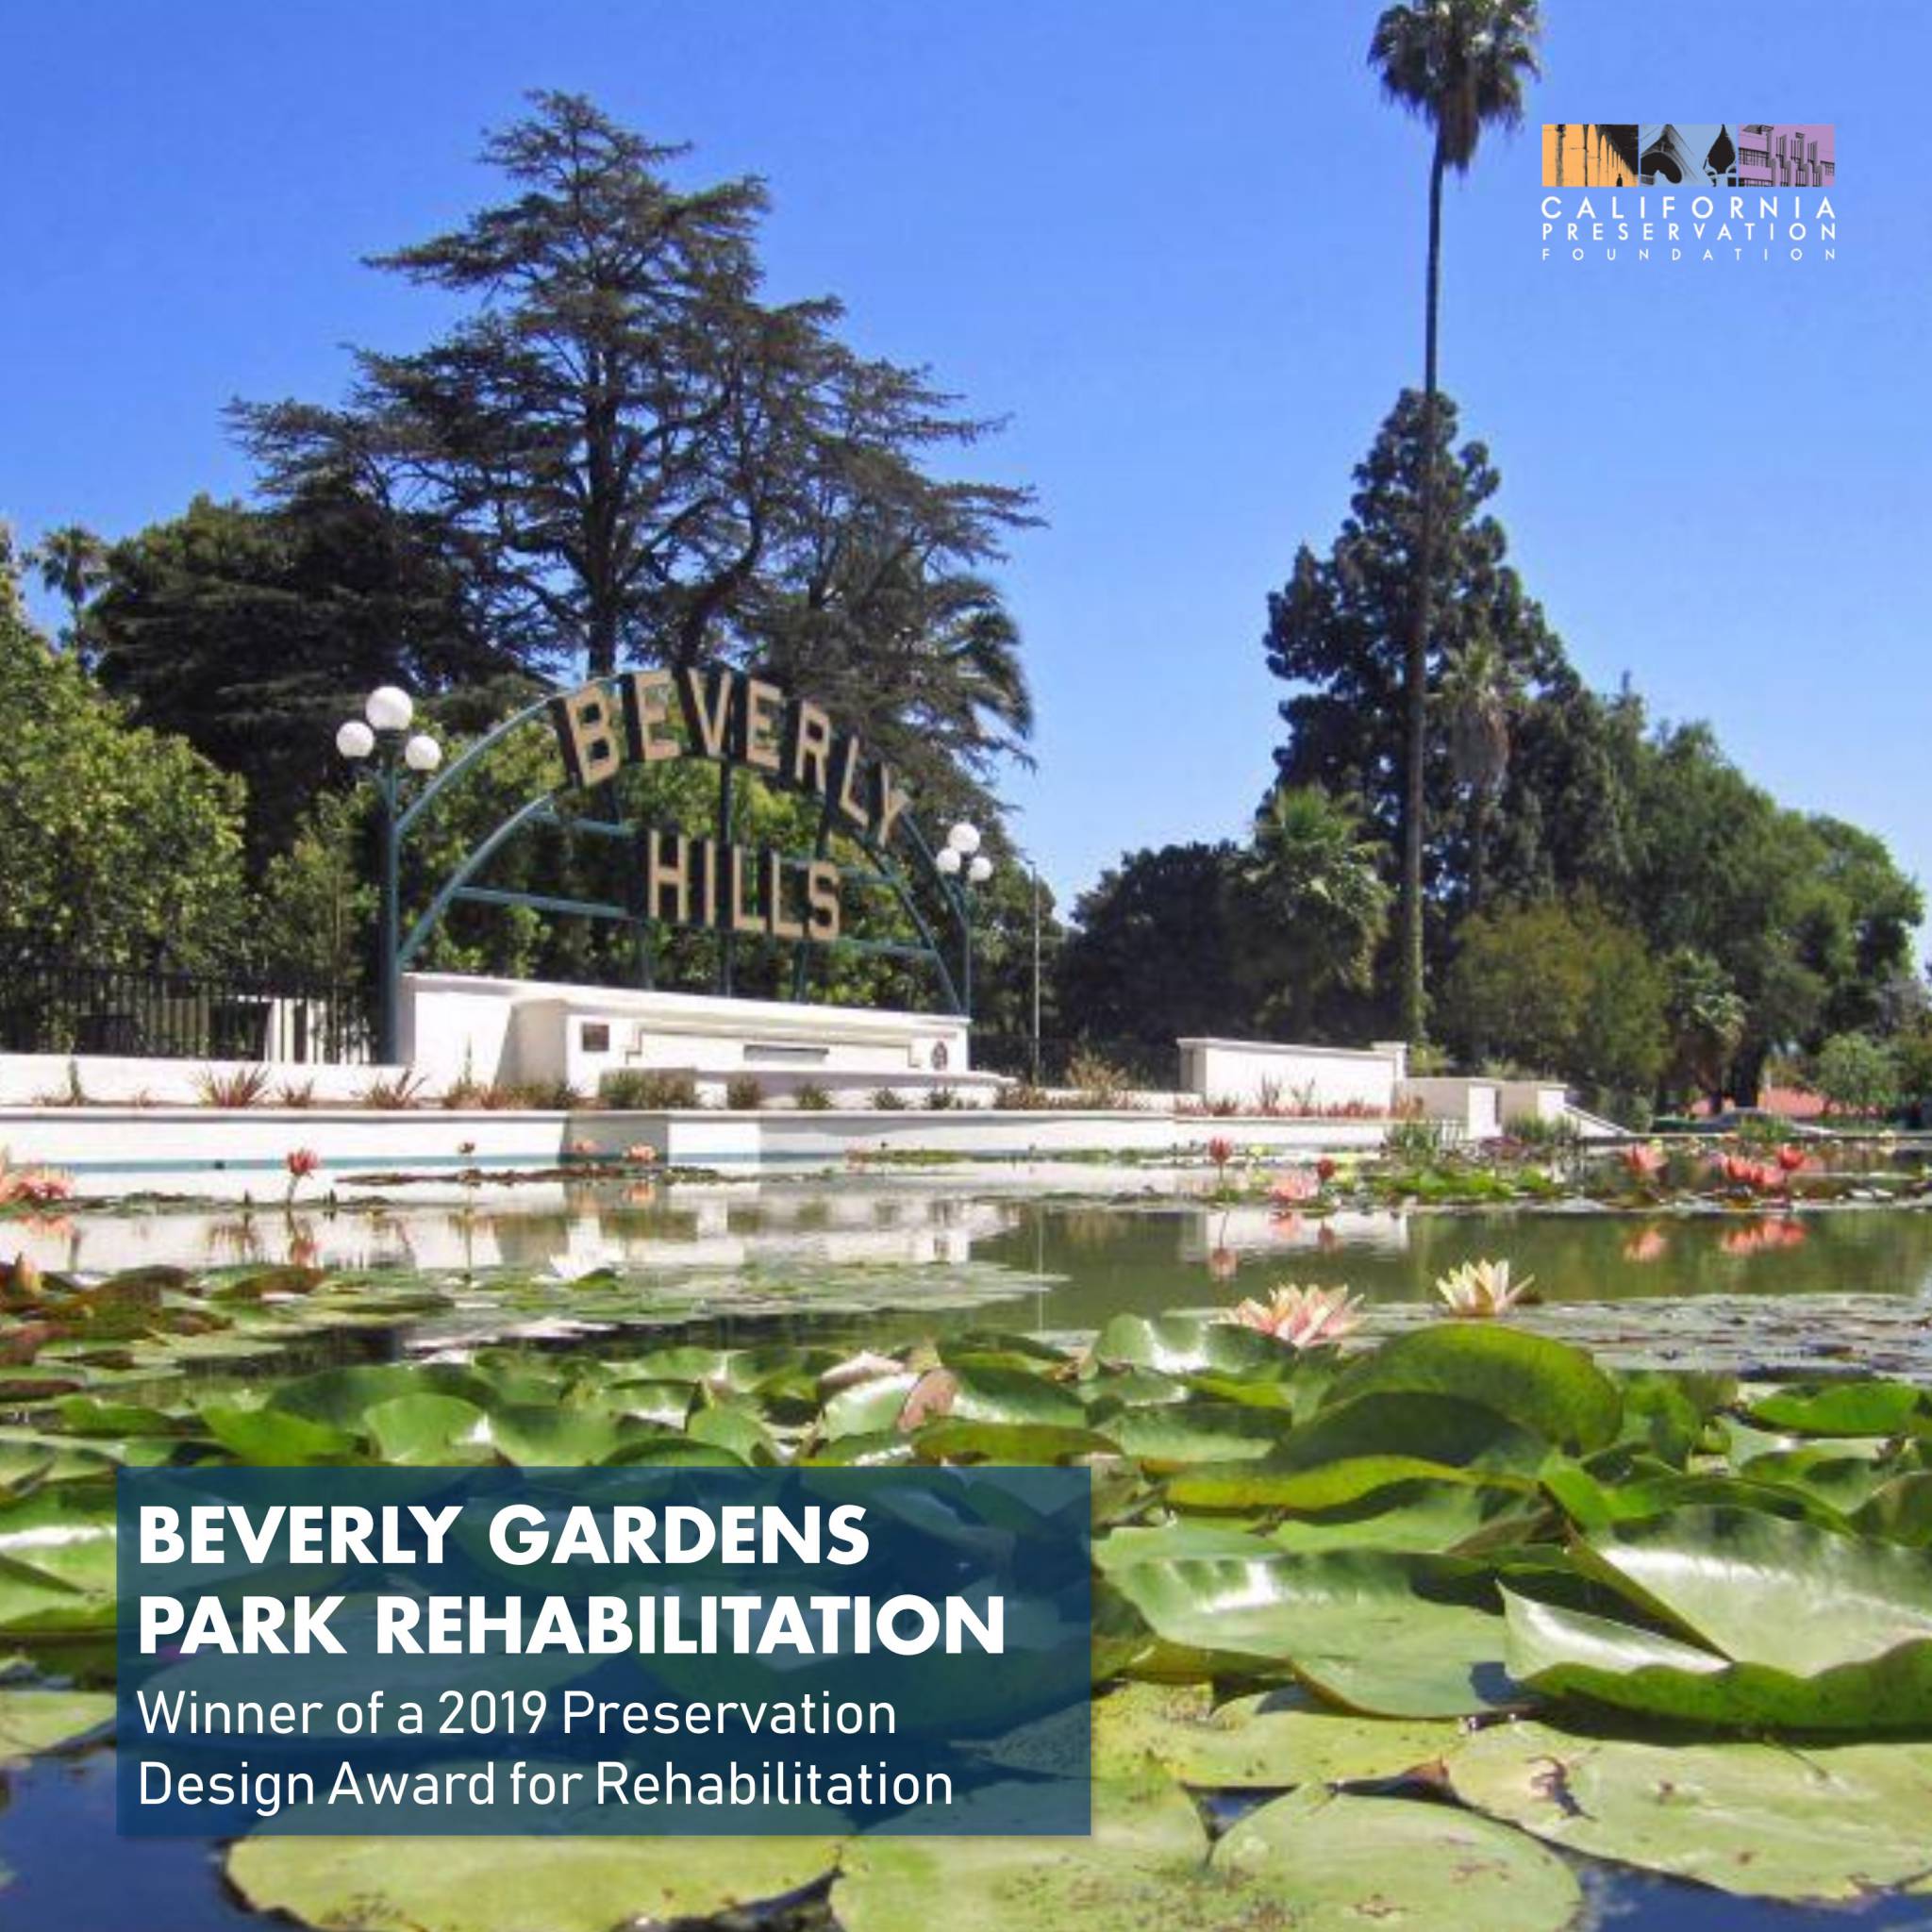 All 102+ Images beverly gardens park beverly hills ca Stunning